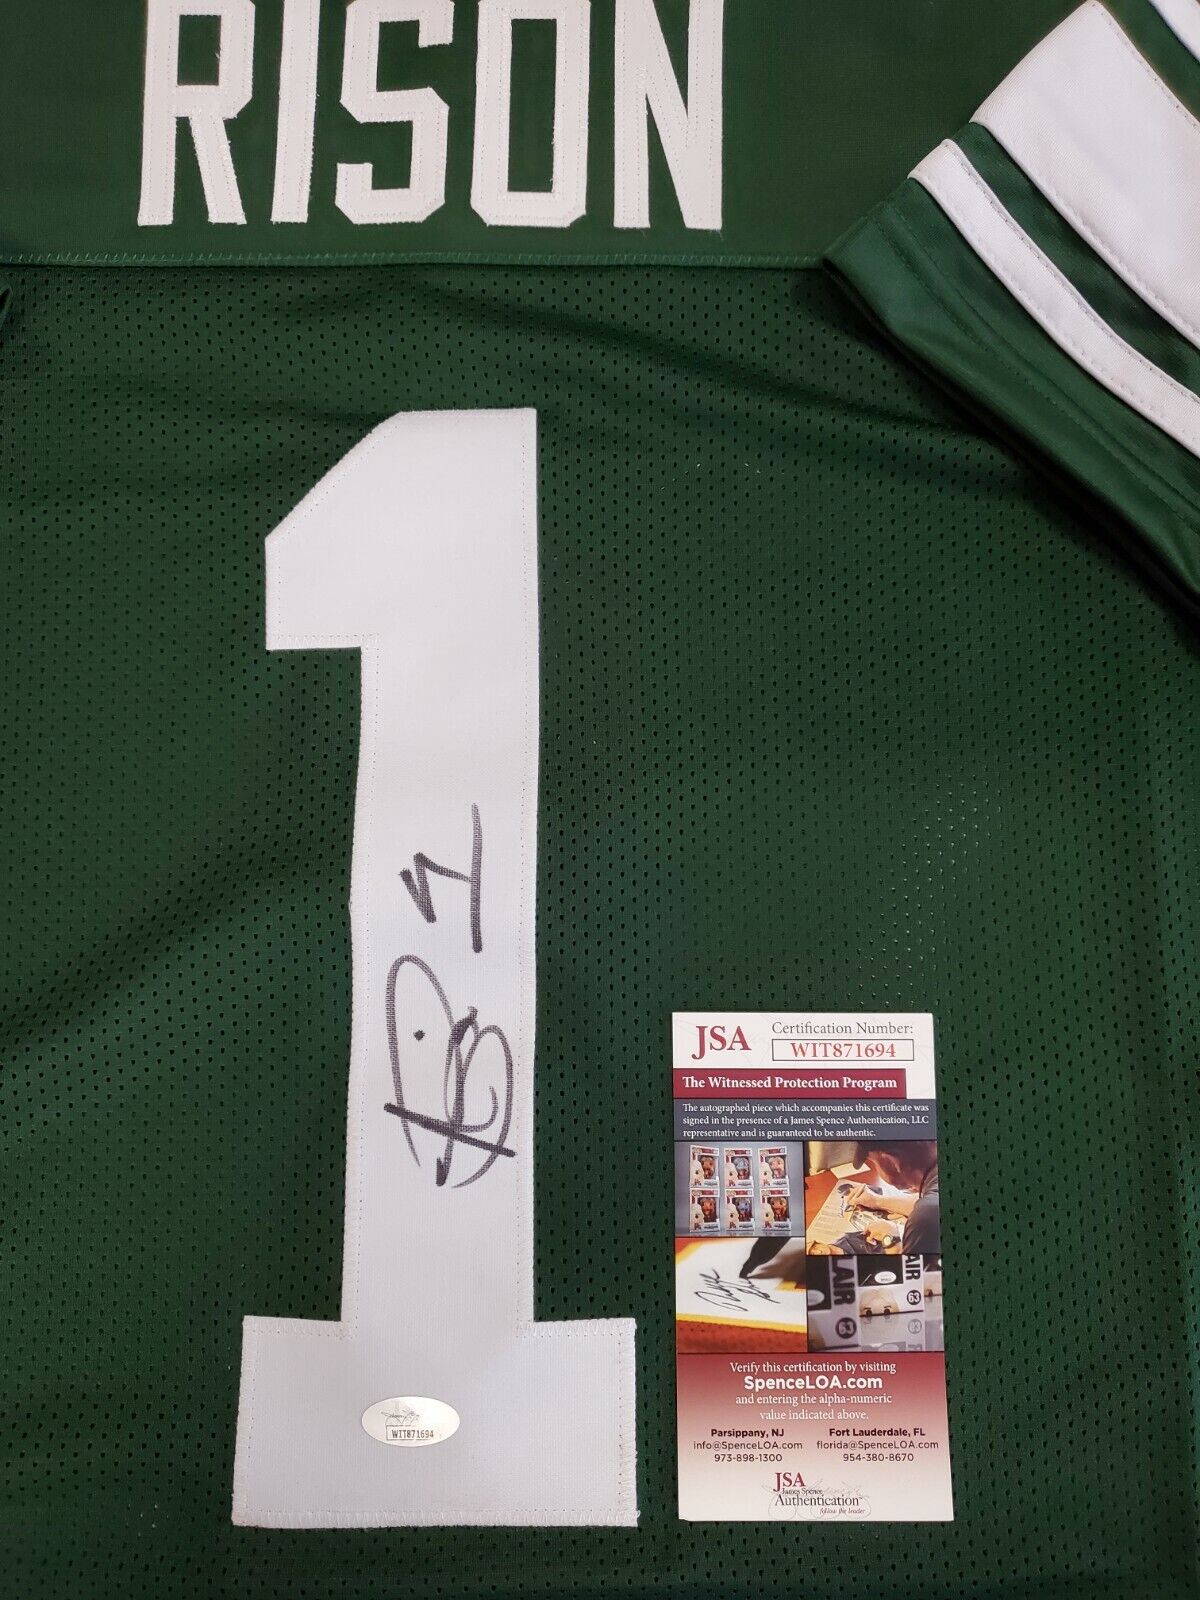 MVP Authentics Michigan State Spartans Andre Rison Autographed Signed Jersey Jsa Coa 98.10 sports jersey framing , jersey framing